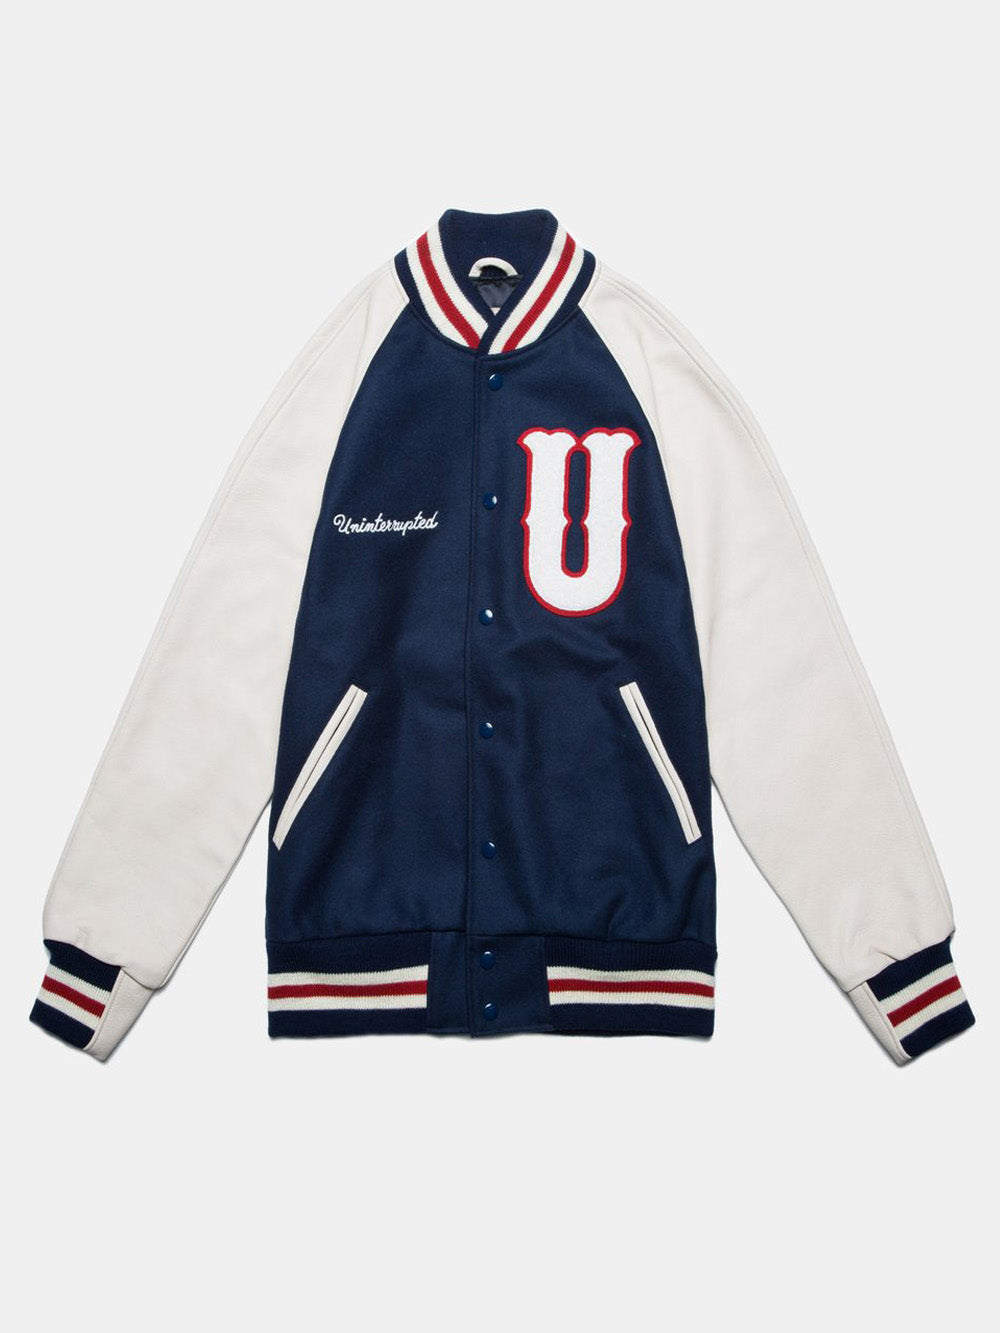 front view of the blue and white varsity jacket with a patch "U"